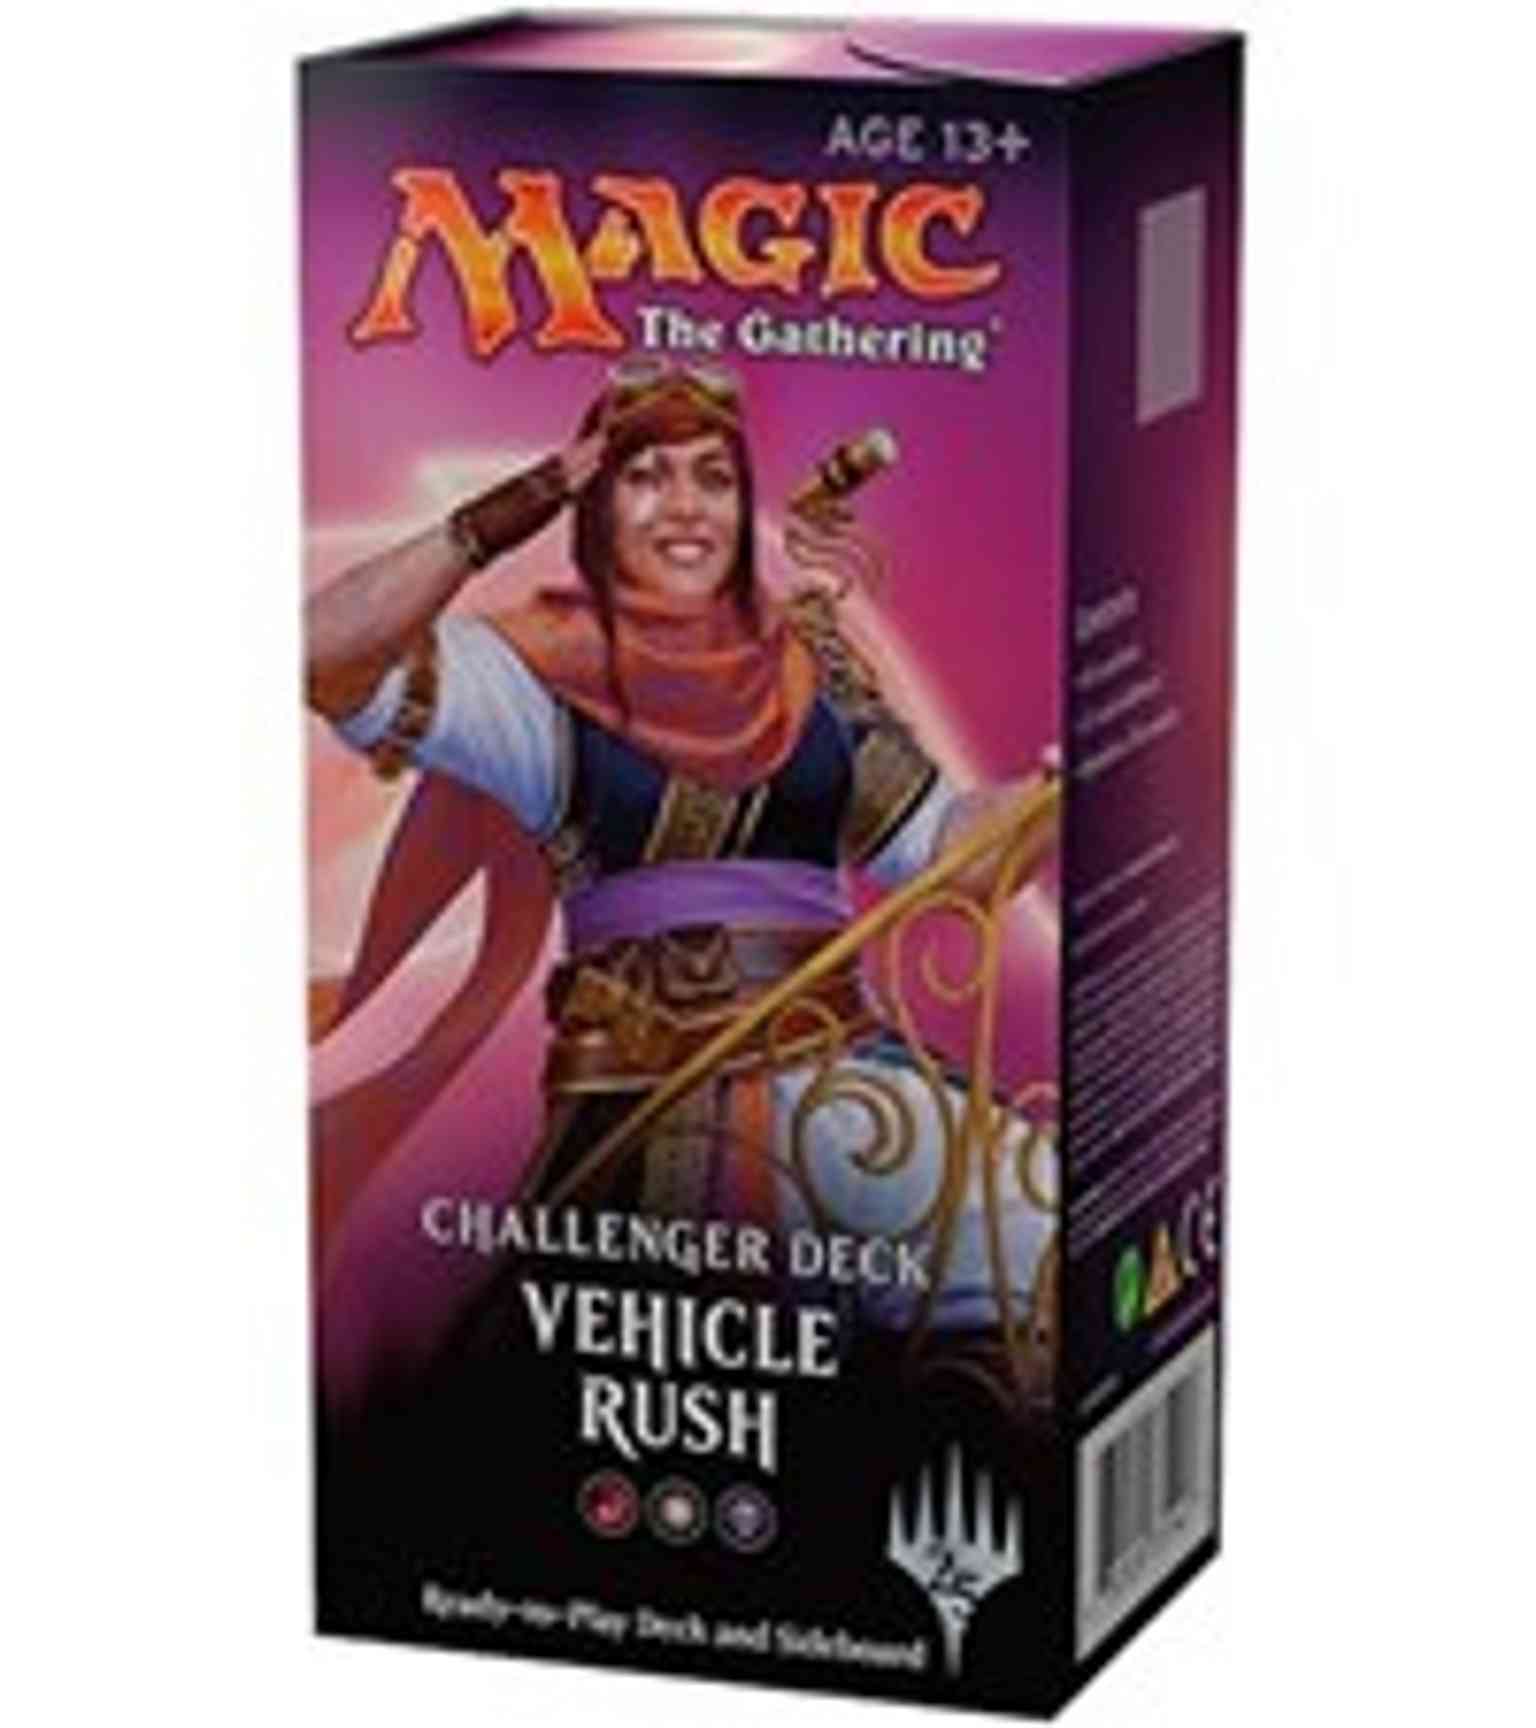 Challenger Deck 2018: Vehicle Rush magic card front